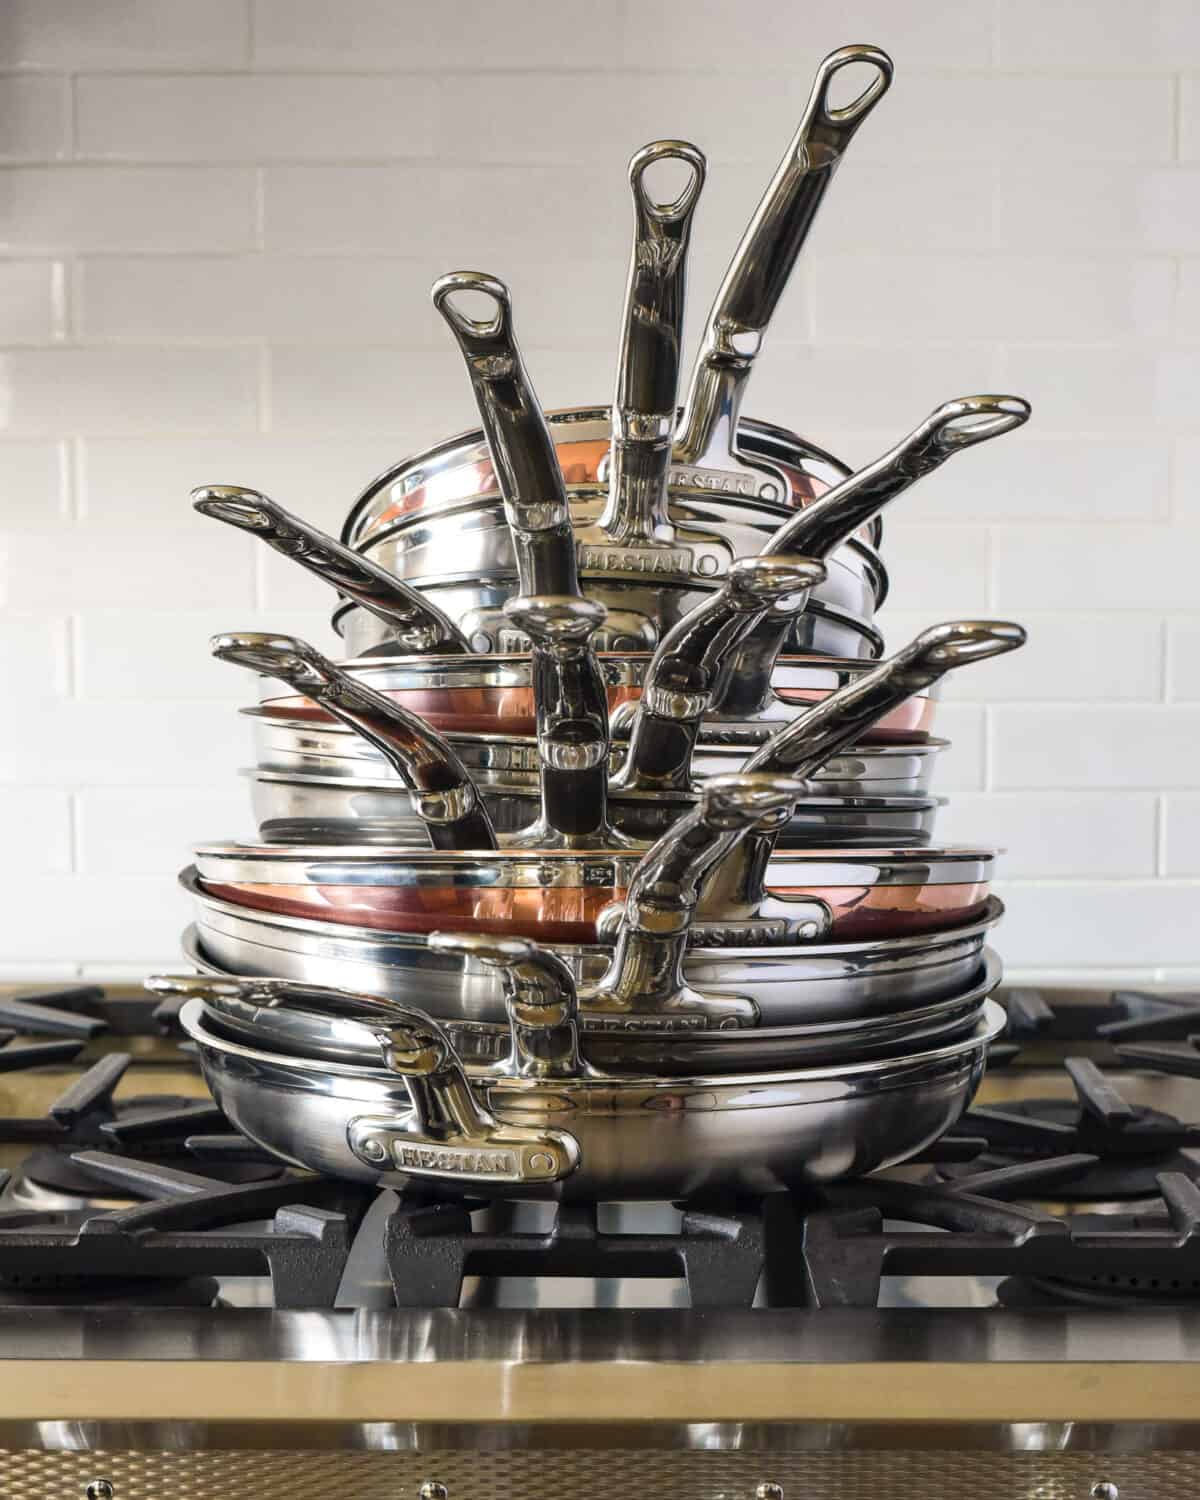 A stack of skillets of various sizes on a range.